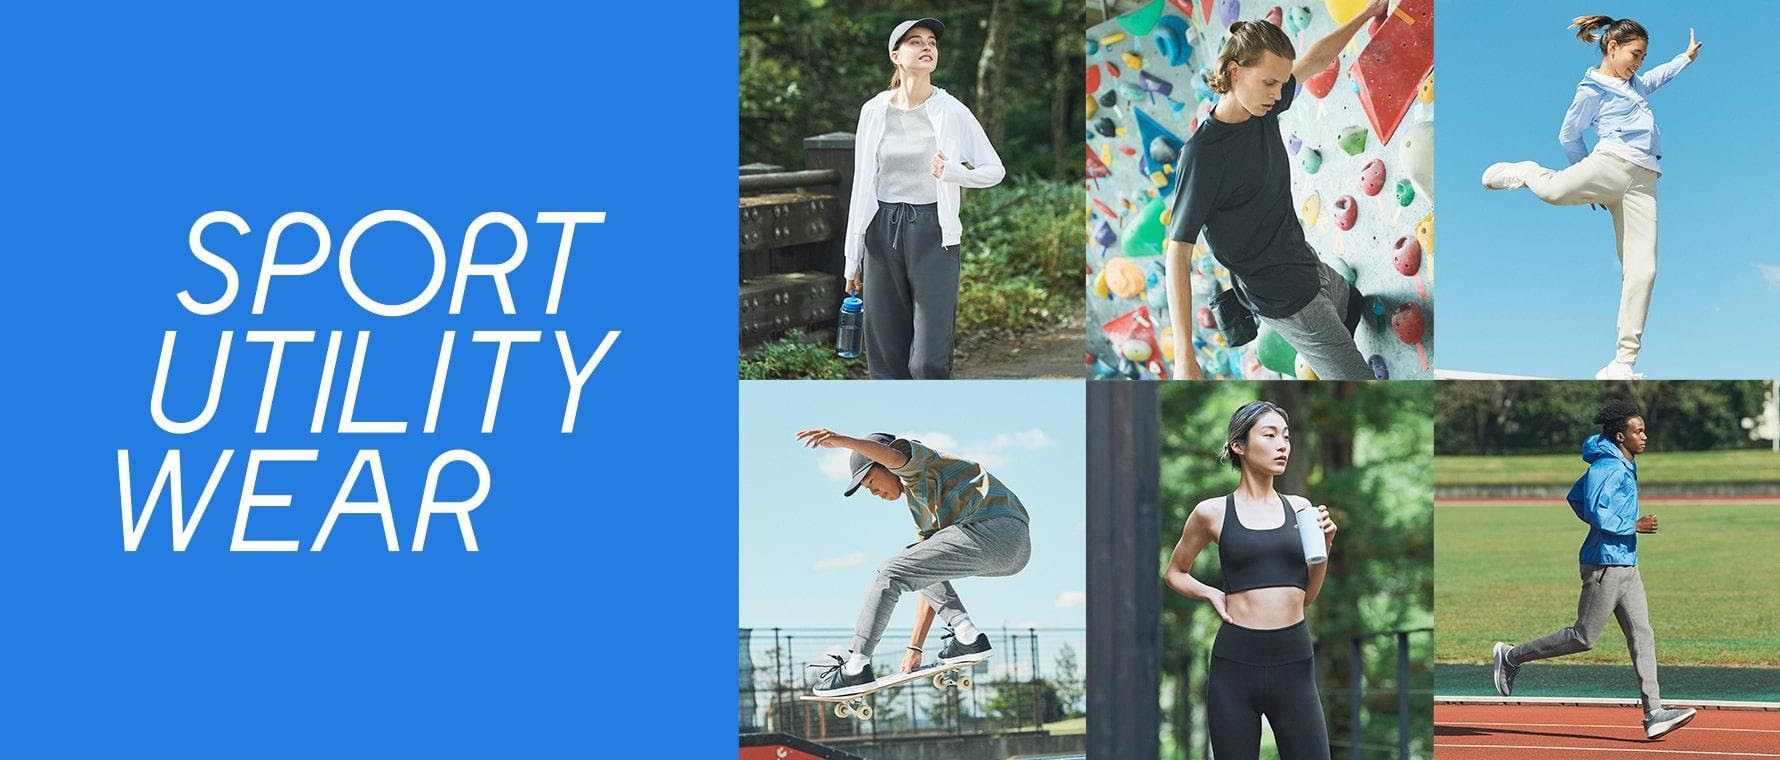 Stay active your way with Uniqlo's Sport Utility Wear Collection